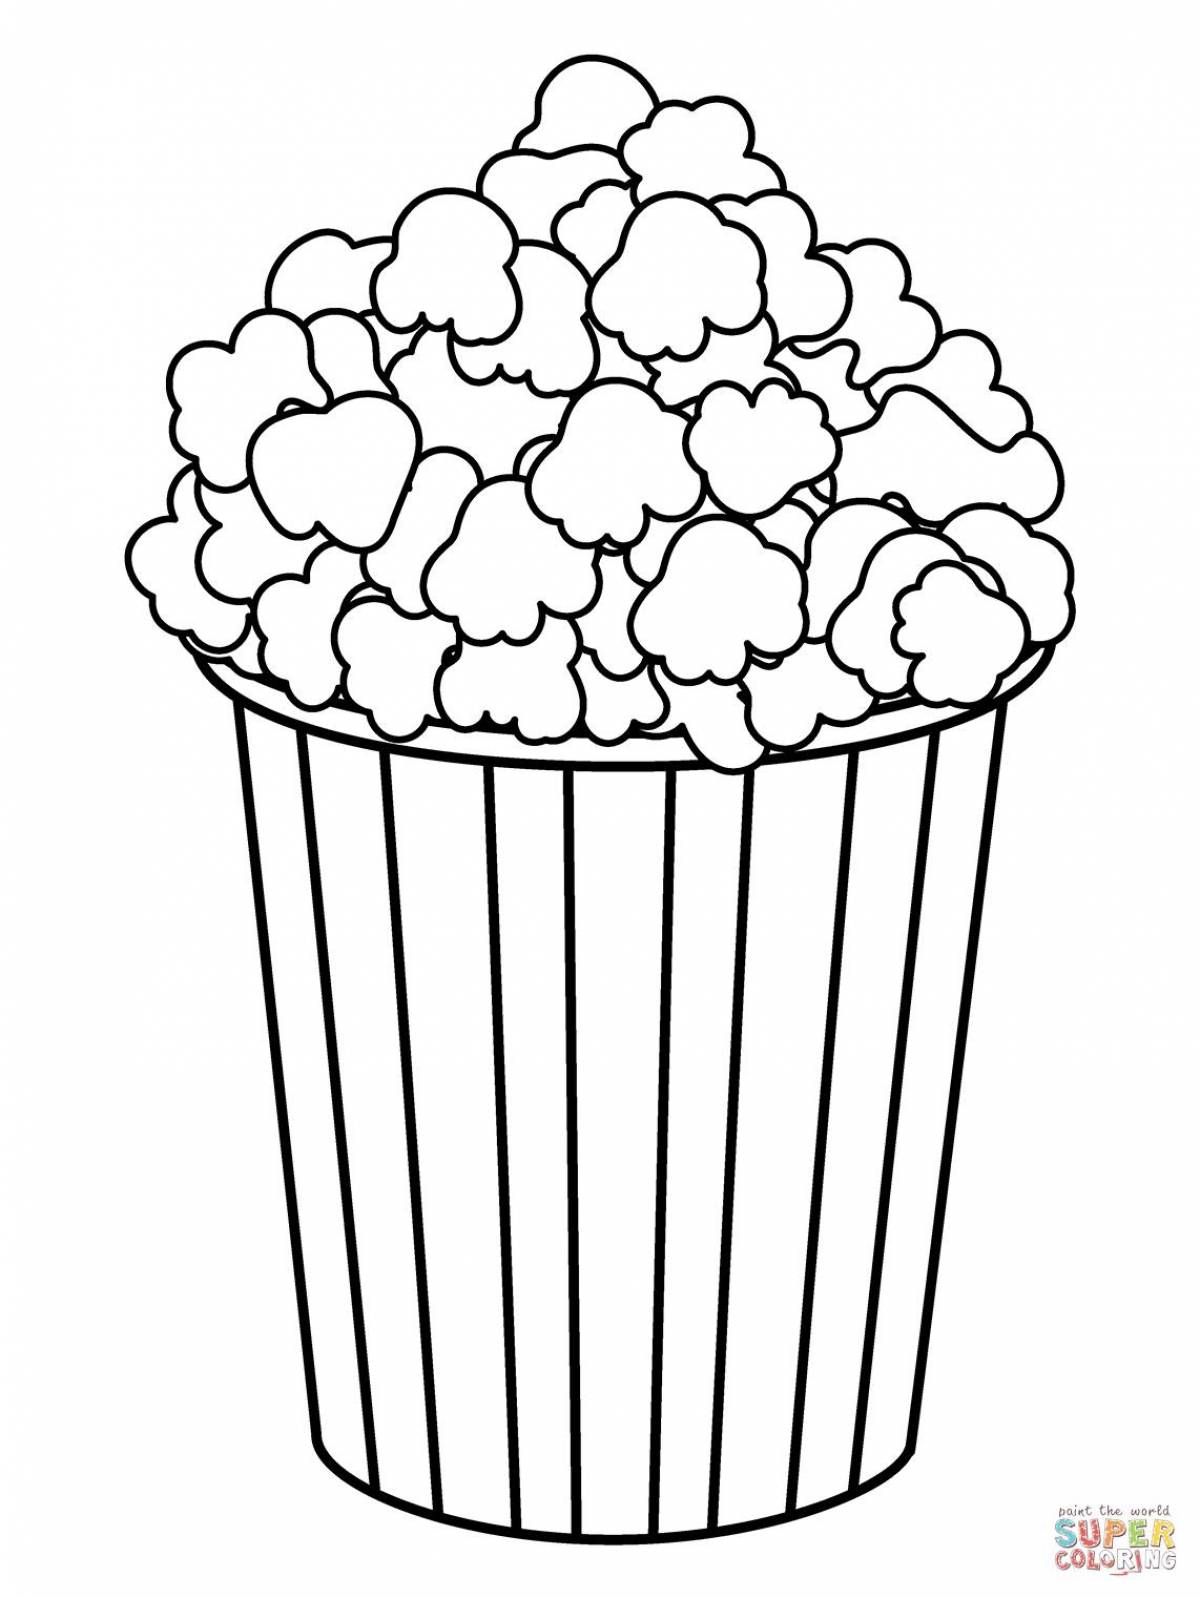 Puff popcorn coloring page